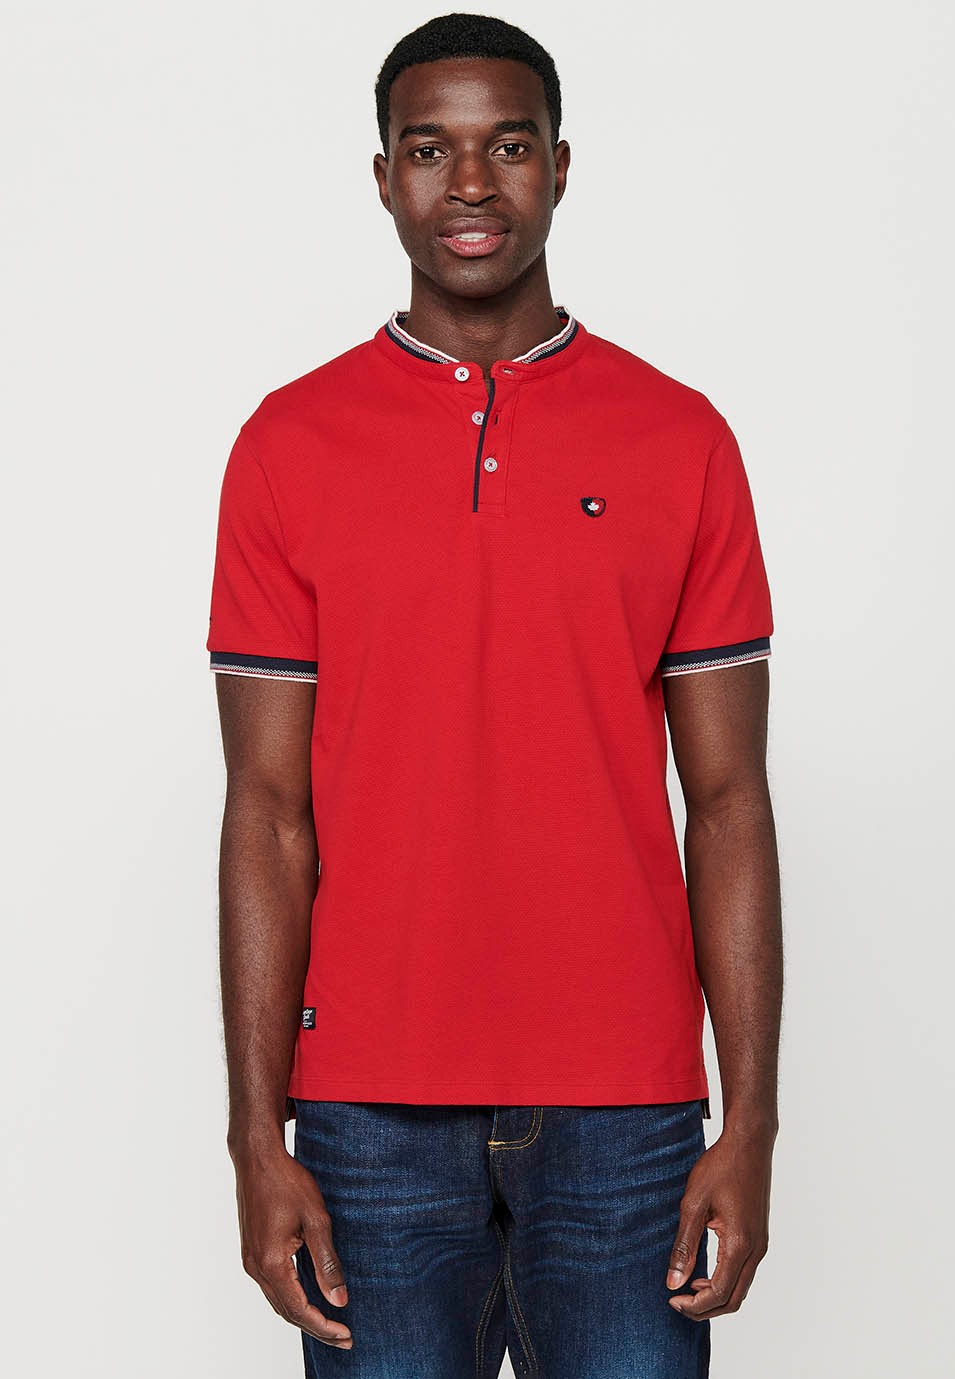 Short-sleeved cotton polo shirt finished in rib with a round neck with buttoned opening and textured with side slits in Red for Men 3